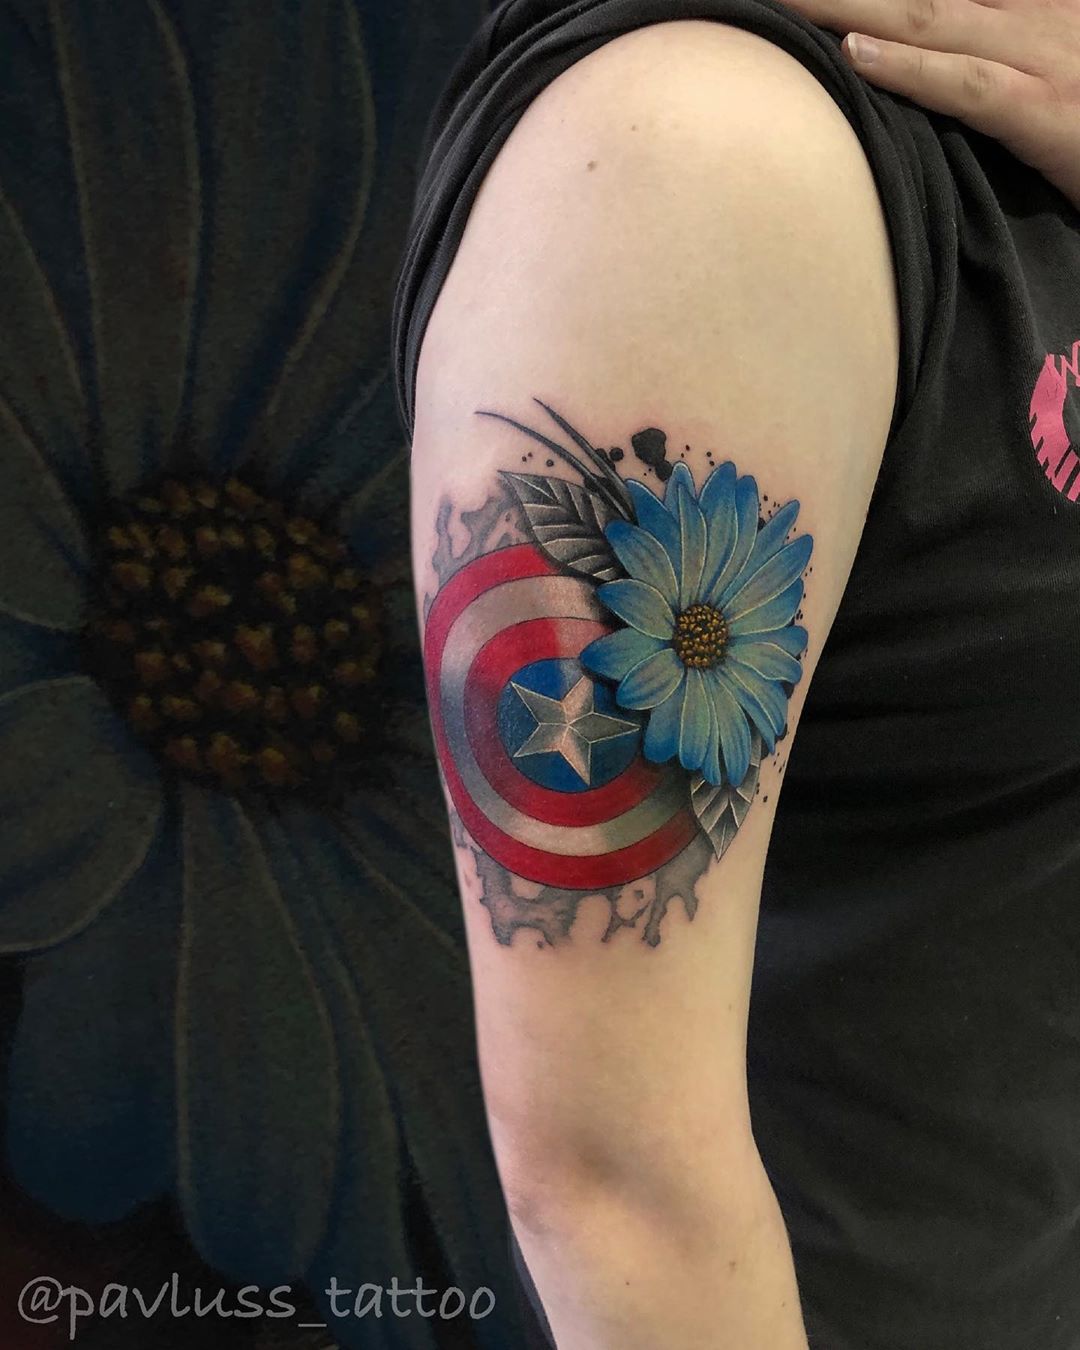 Captain America's shield and flower tattoo